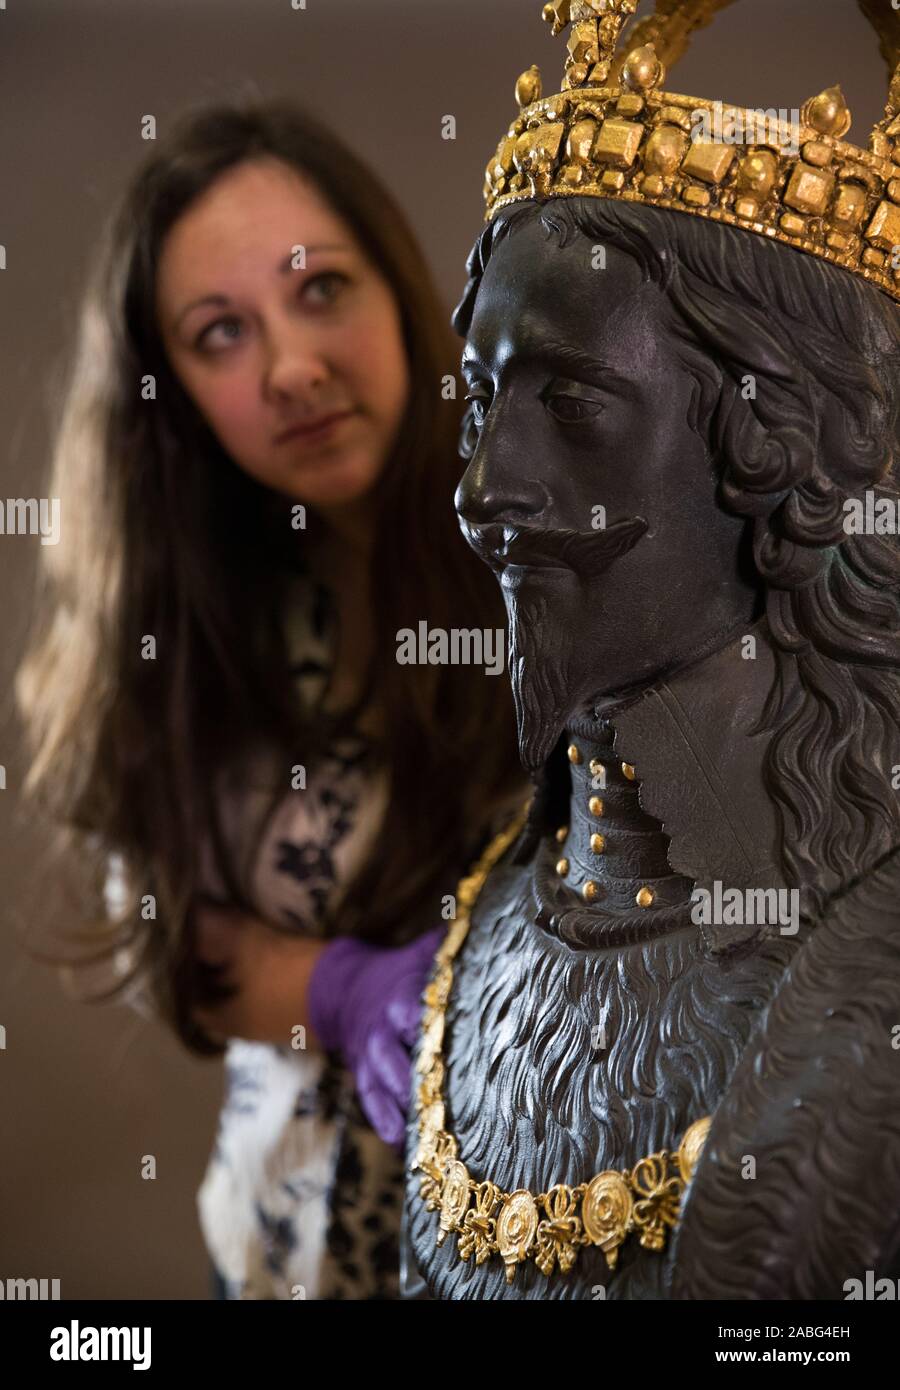 Portia Tremlett, Public Programme Engagement officer for the Novium Museum, looks at the original Market Cross sculpture, a bust of King Charles I by Hubert Le Sueur, as it returns to it's original home in Chichester, where it will go on display at the Novium Museum on loan from Tate Britain. Stock Photo